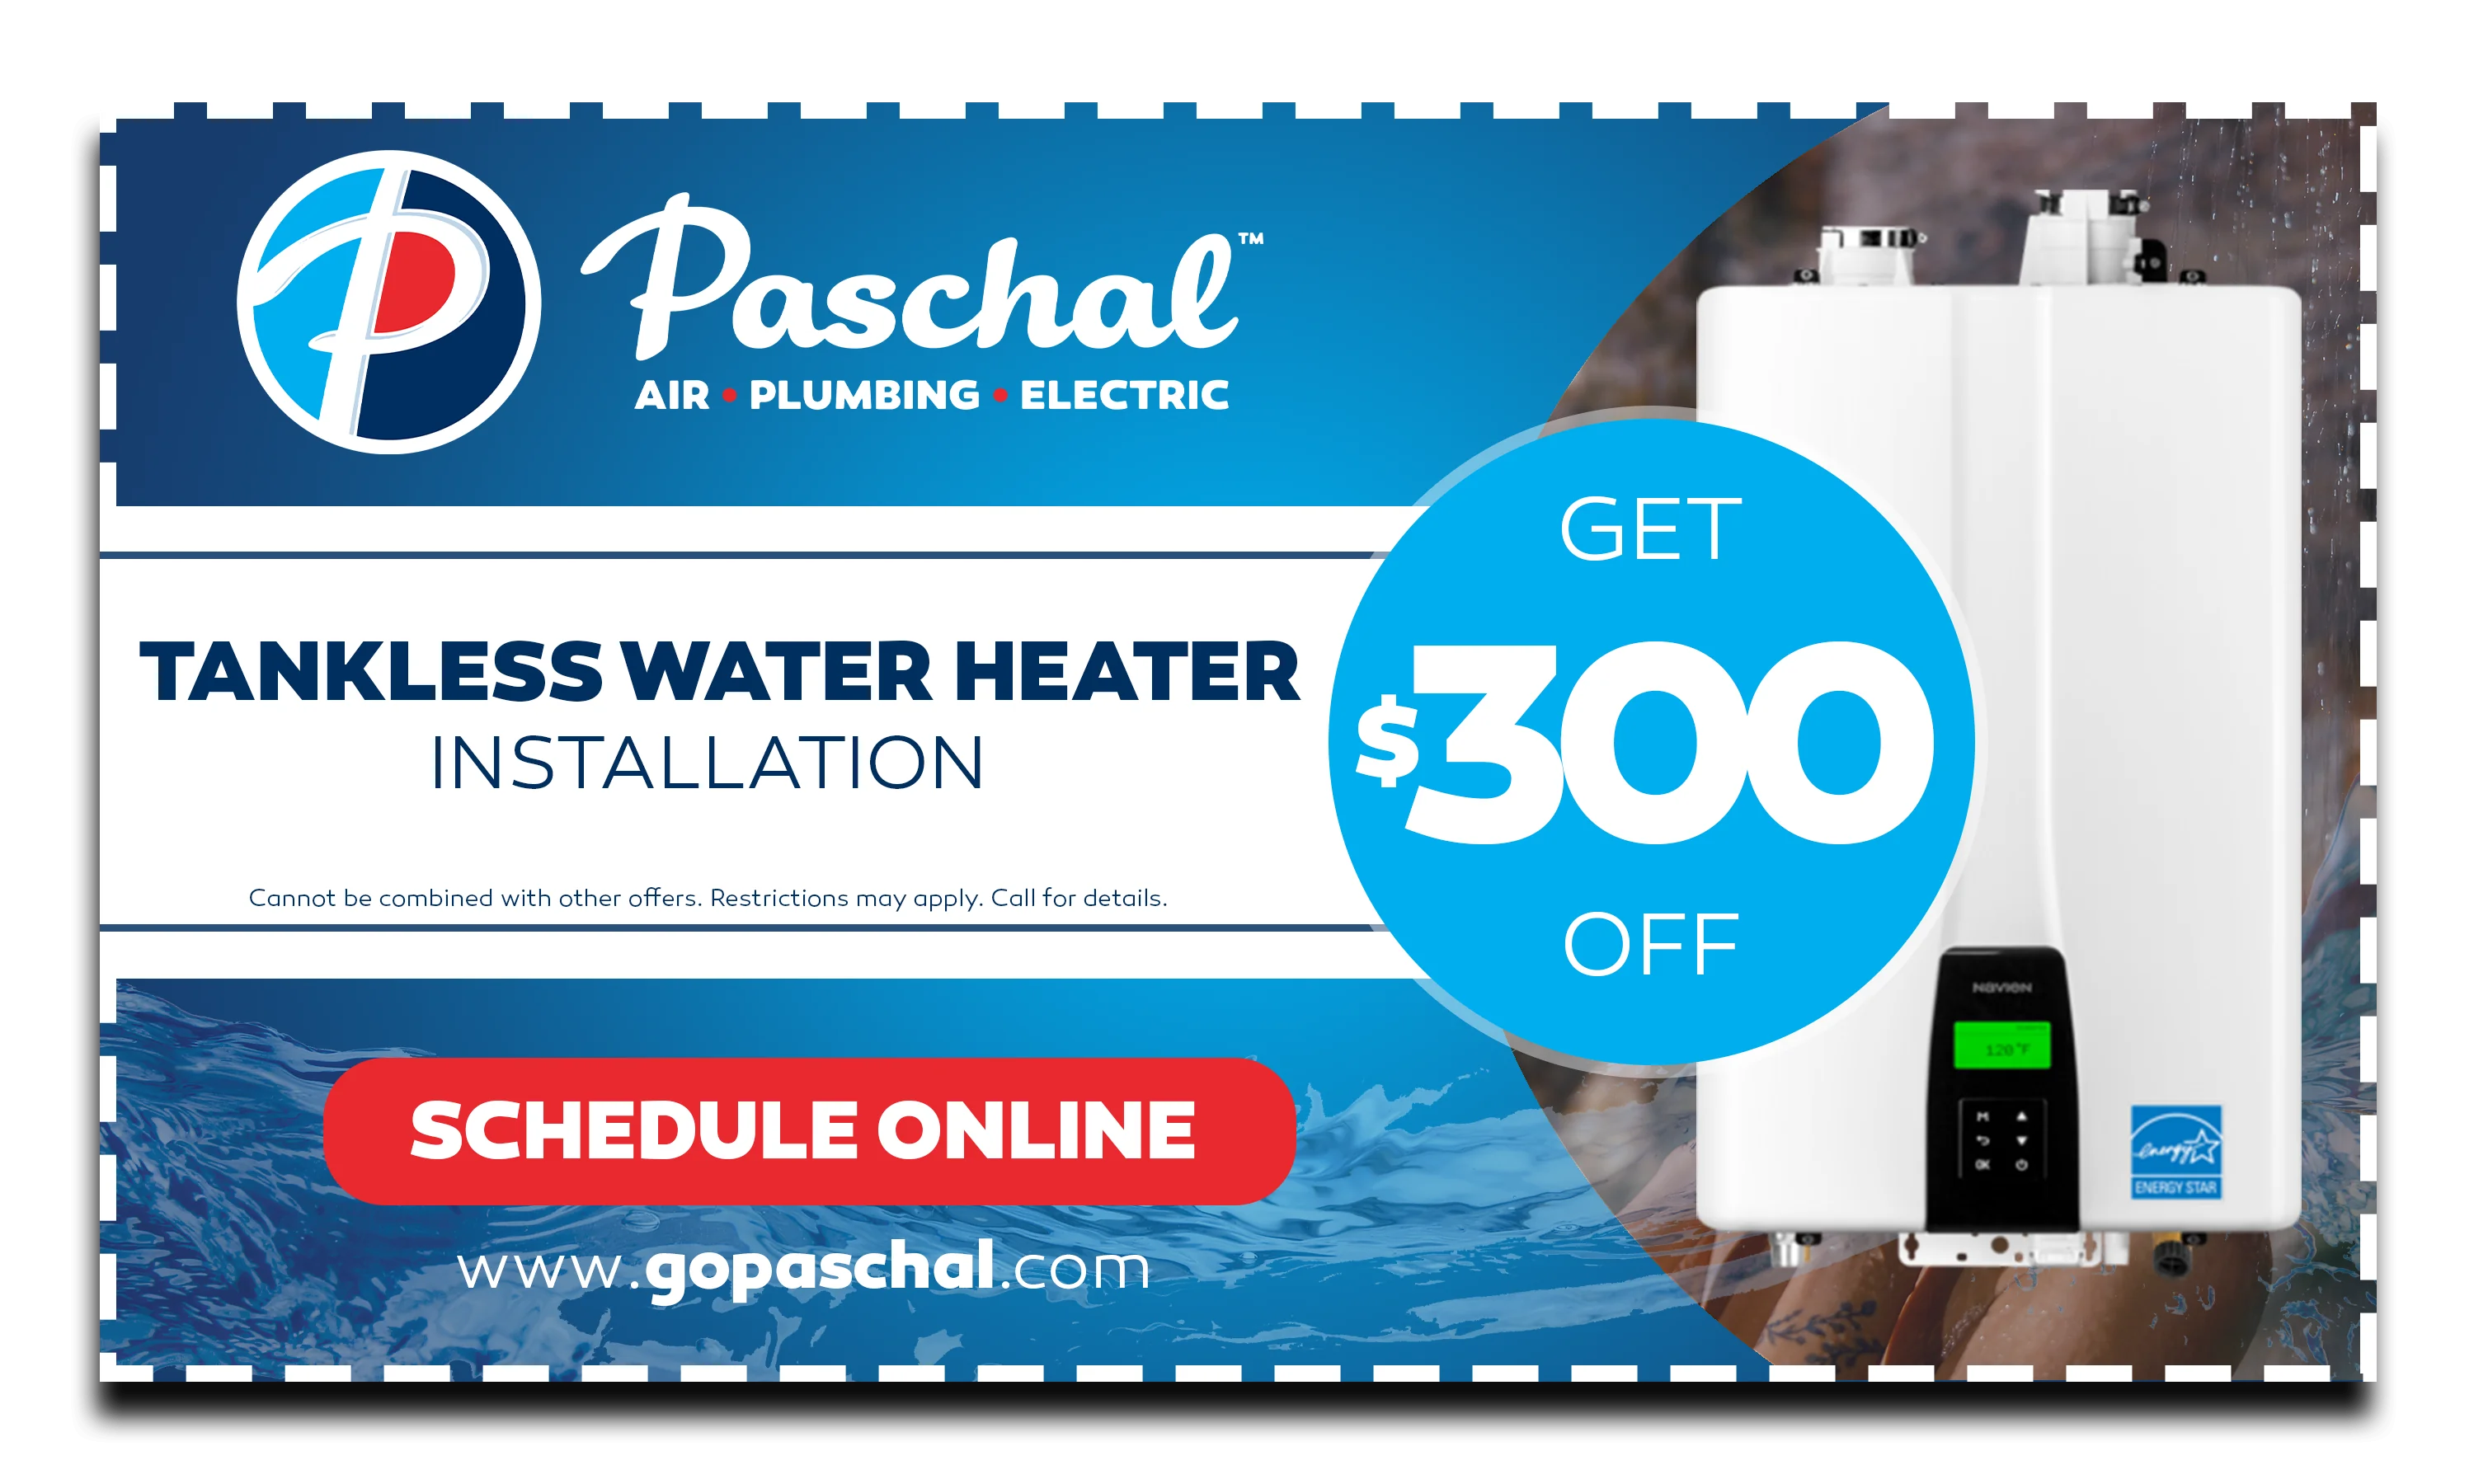 Pascal Box - The only high precision all-in-one pressure charger